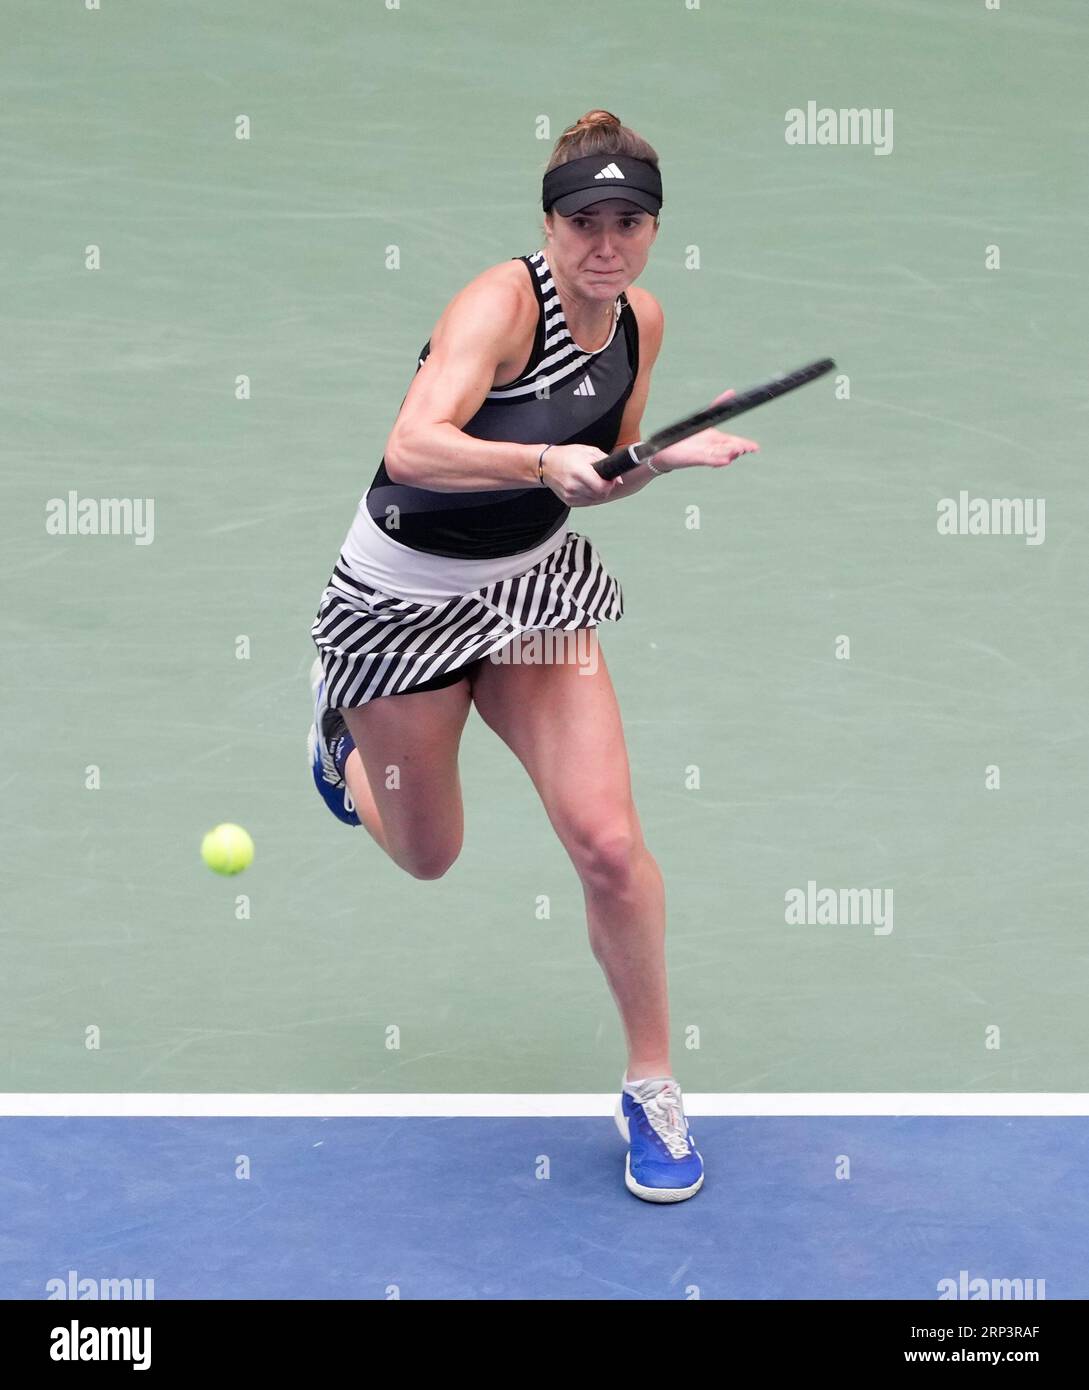 September 2, 2023 Elina Svitolina (UKR) loses to Jessica Pegula (USA), 6-4, 4-6, 6-2 at the US Open being played at Billie Jean King National Tennis Center in Flushing, Queens, NY, USA ©